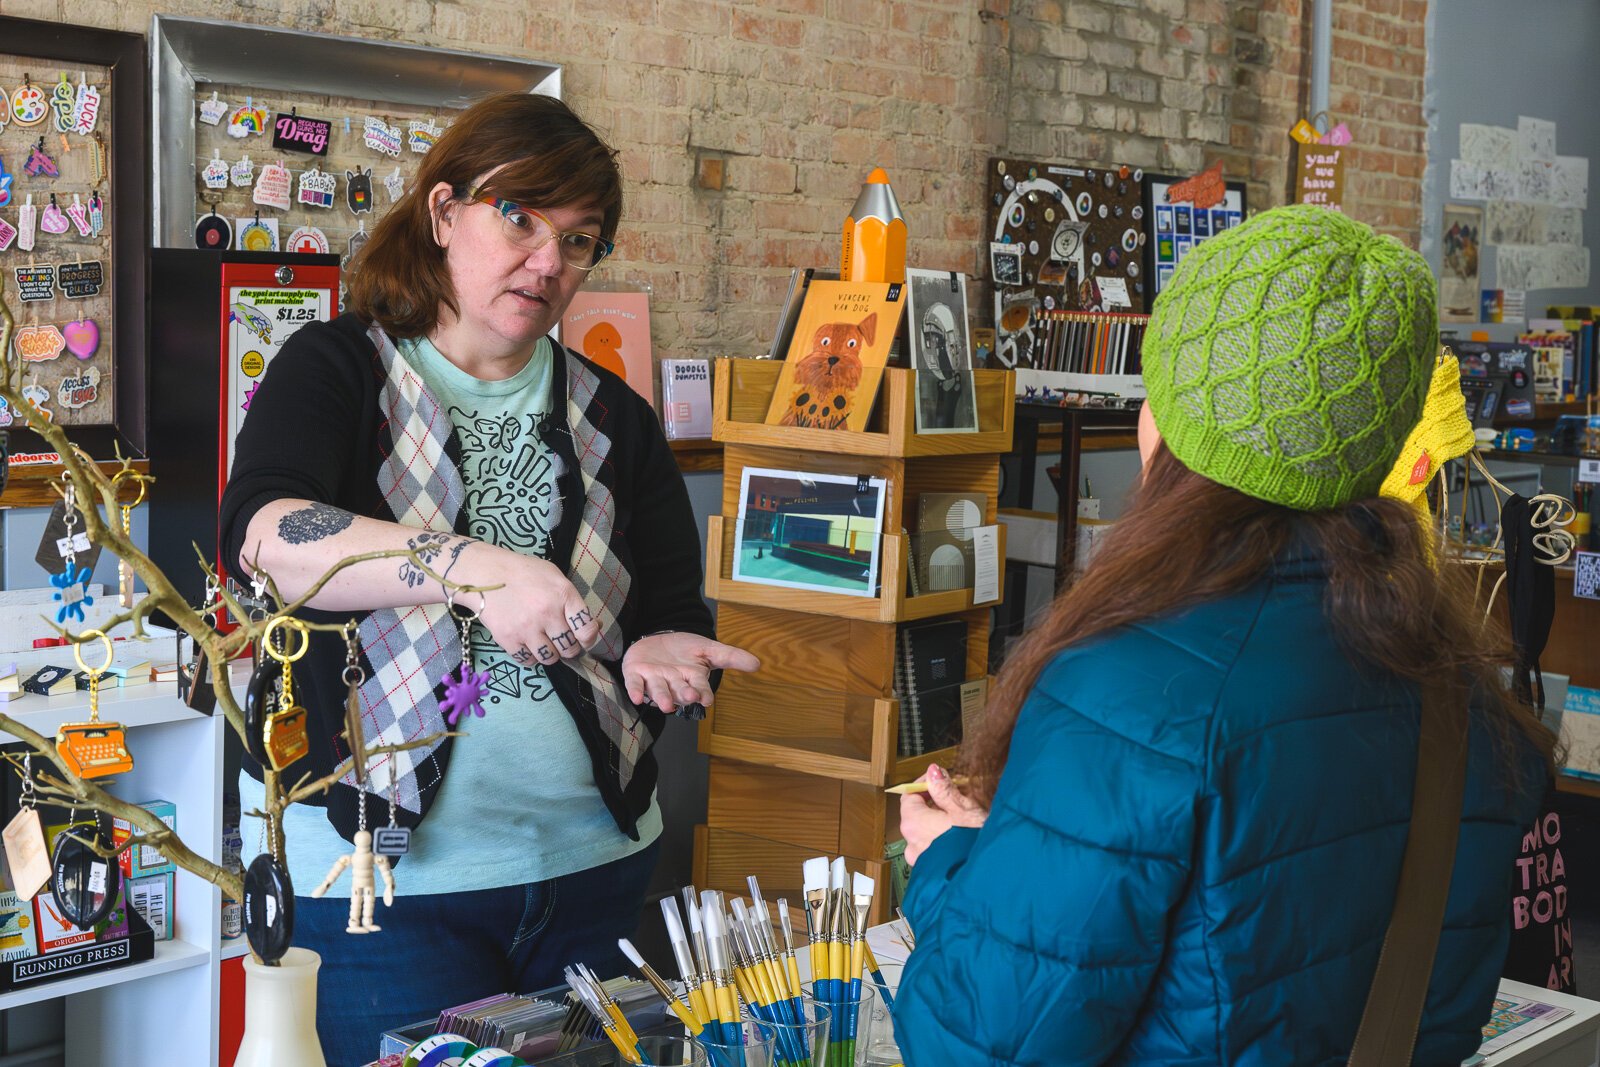 Ypsi Art Supply and Atelier owner Megan Foldenauer talking with a customer.